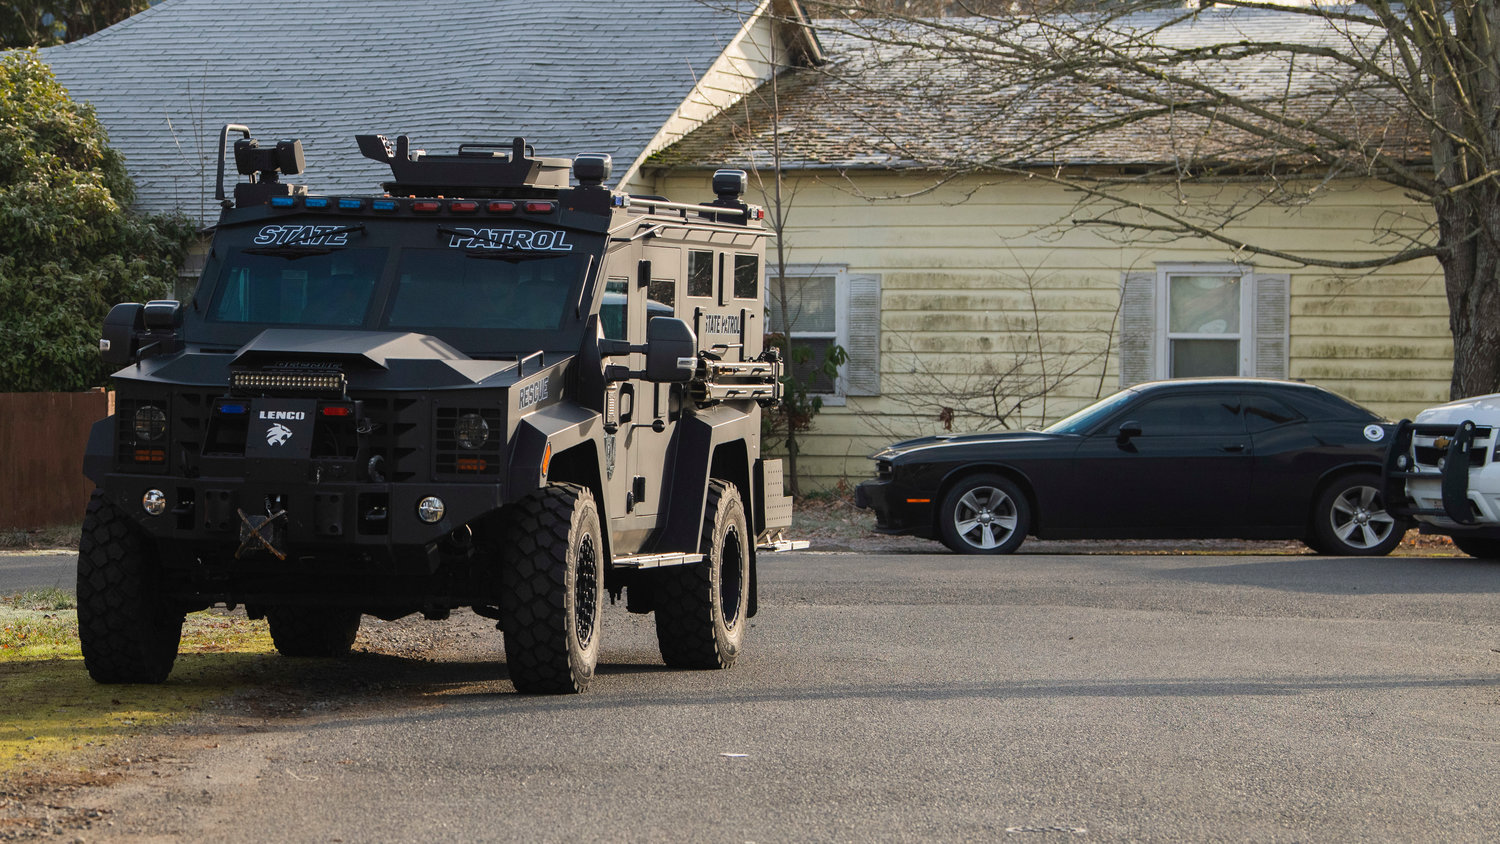 Additional units arrive at an active scene in the 1300 block of Windsor Avenue in Centralia on Thursday.